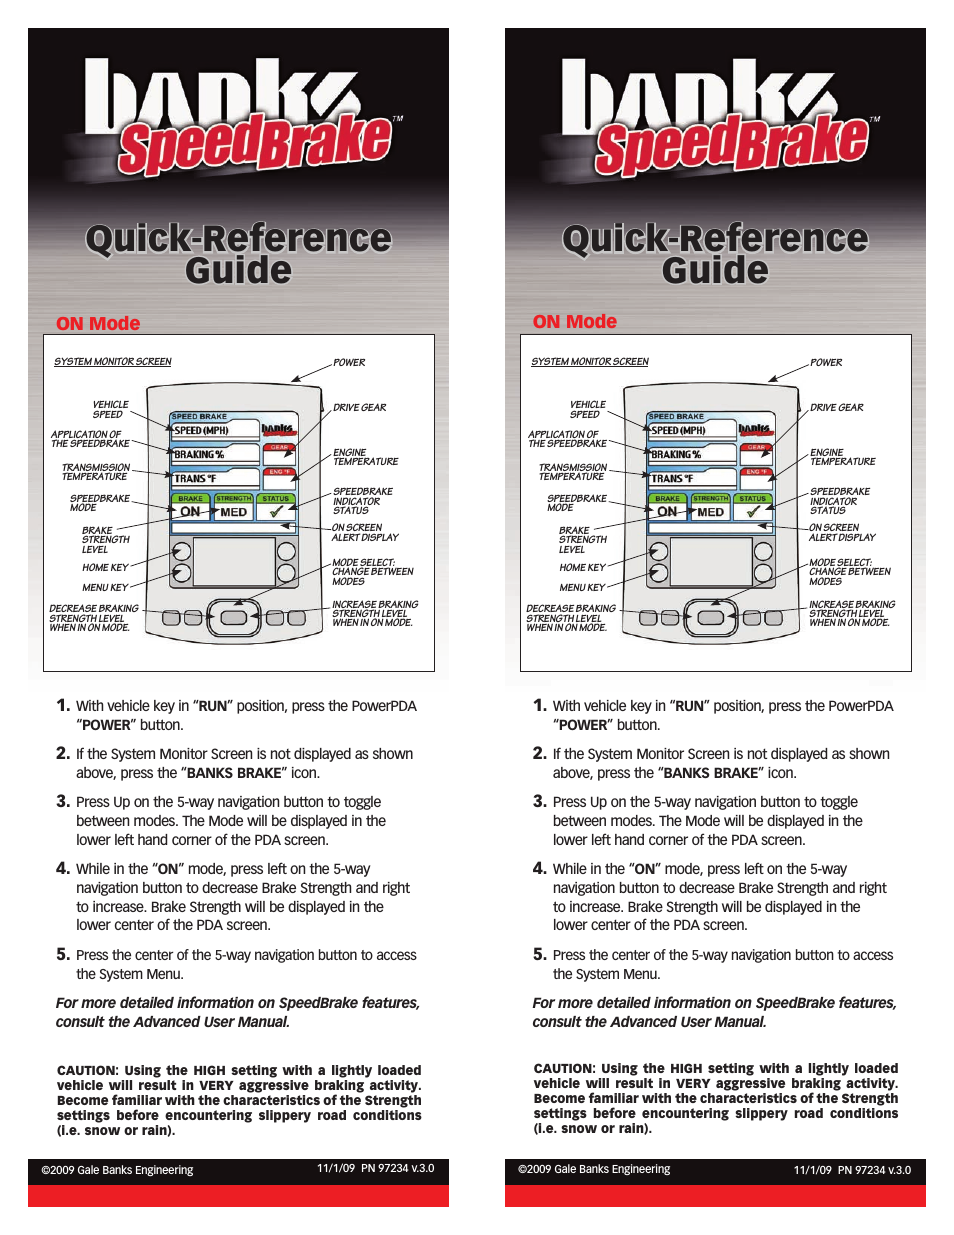 Ford Trucks: (Diesel ’03 - 07 6.0L Power Stroke) Speed Control- SpeedBrake Quick Reference Guide (PDA) For use with PowerPDA